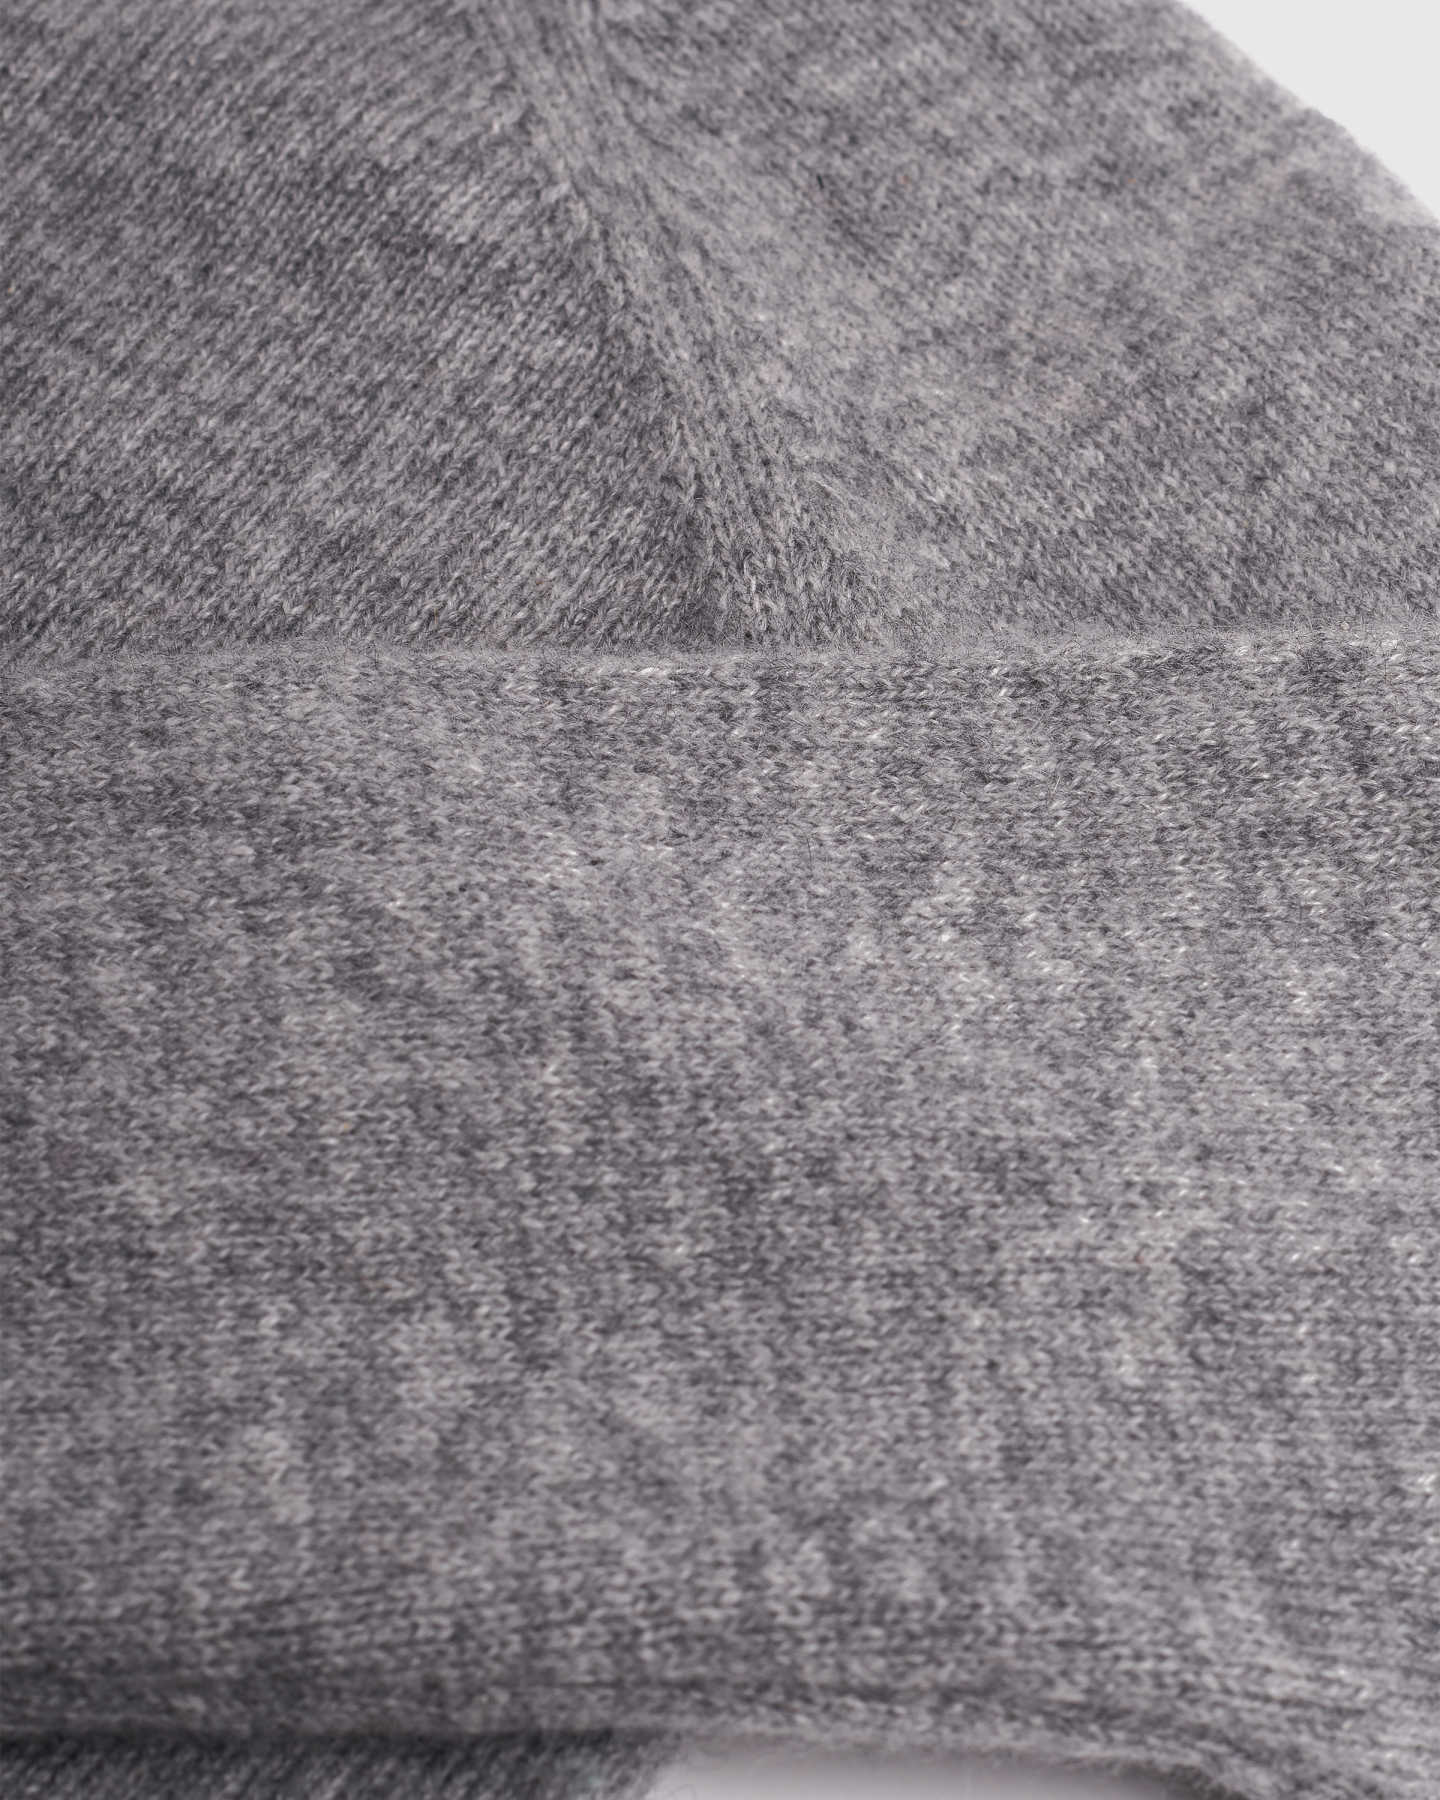 Mongolian Cashmere Toddler Pullover - Heather Grey - 1 - Thumbnail